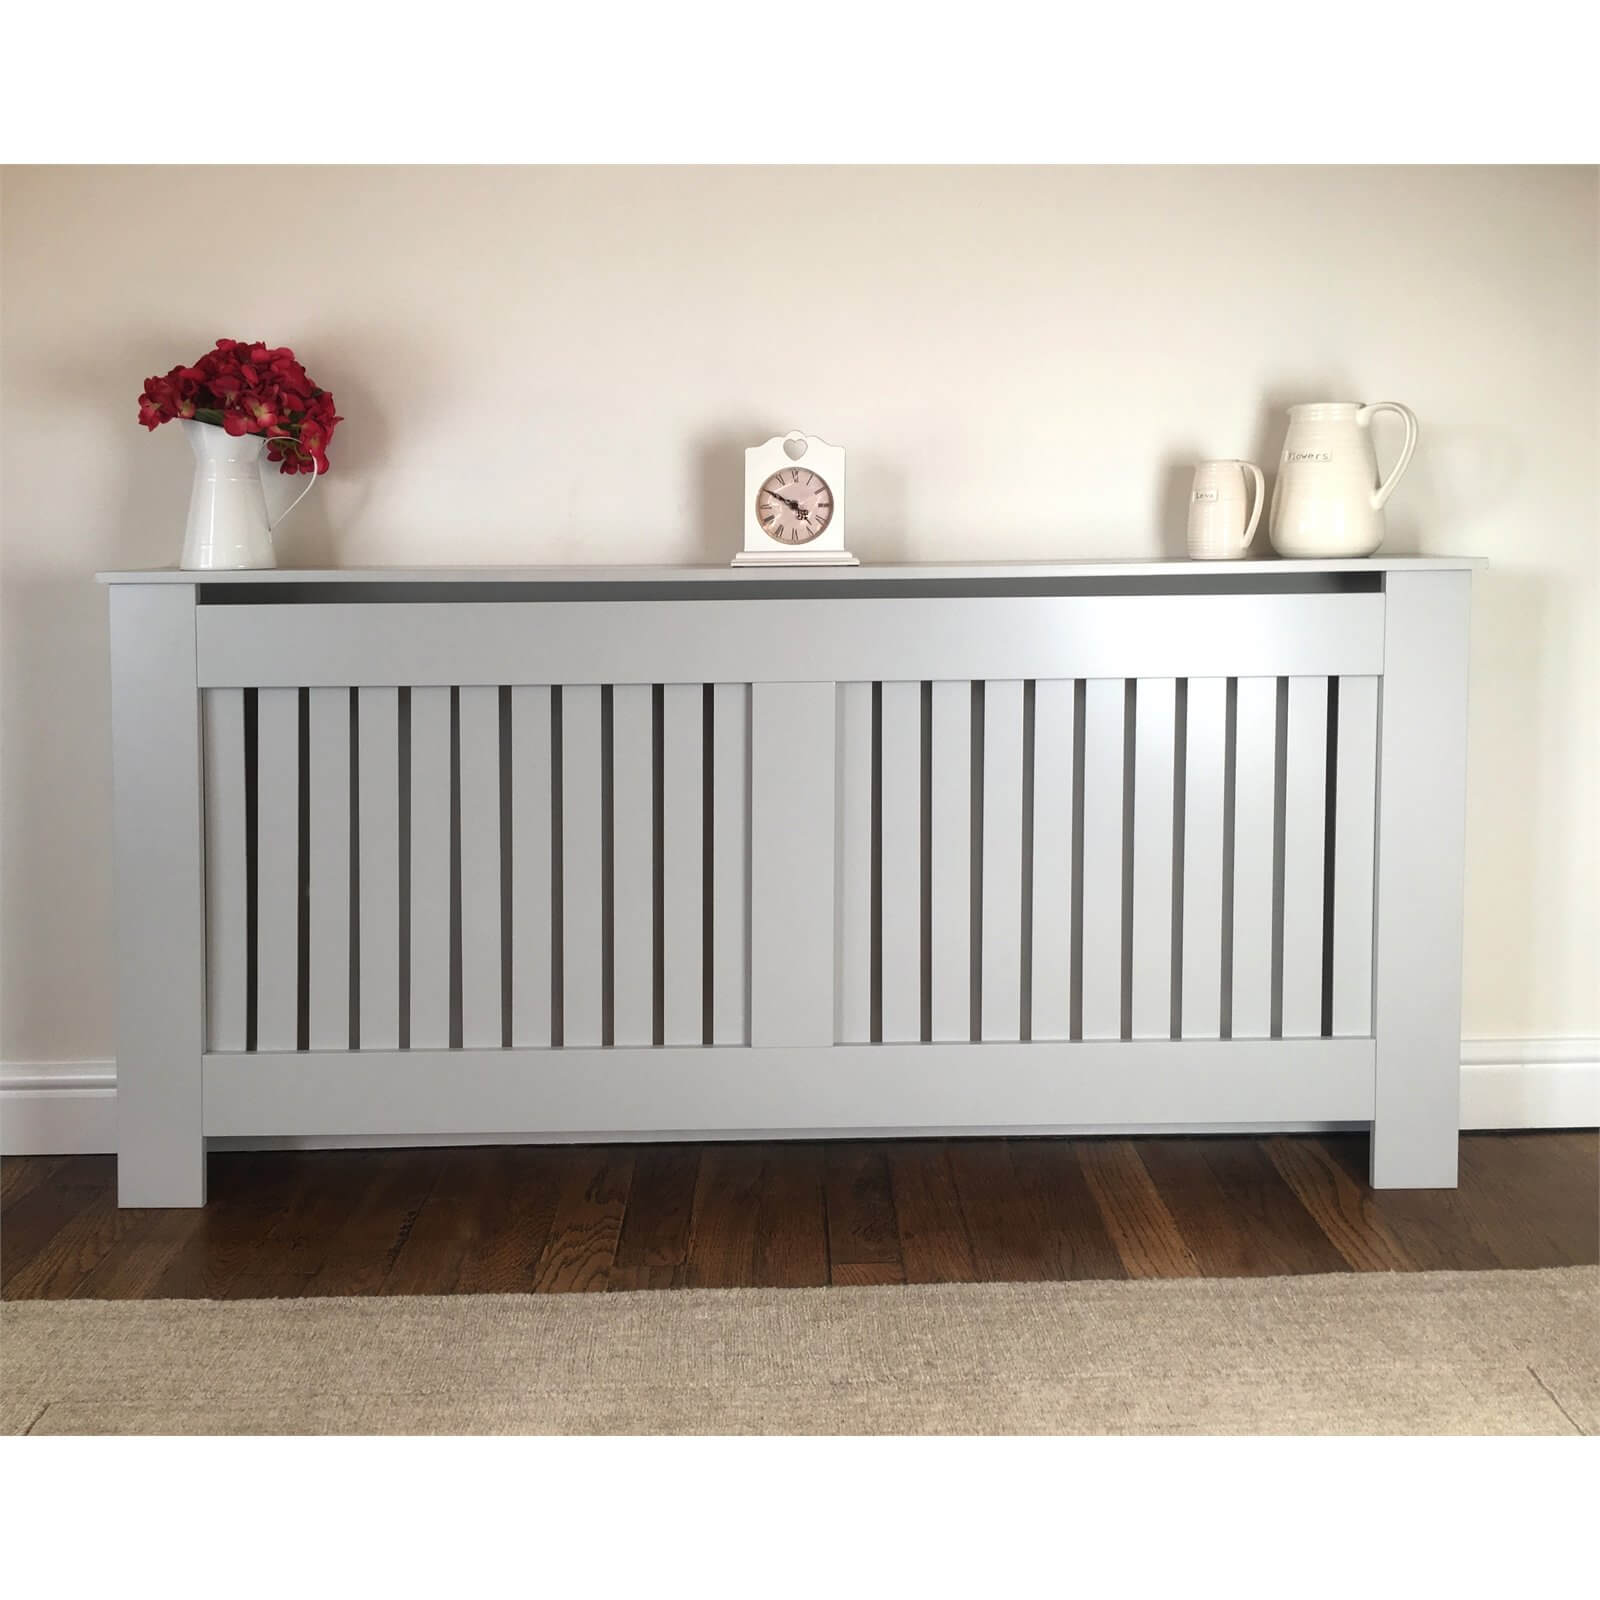 Radiator Cover with Vertical Slatted Design in Grey - Extra Large